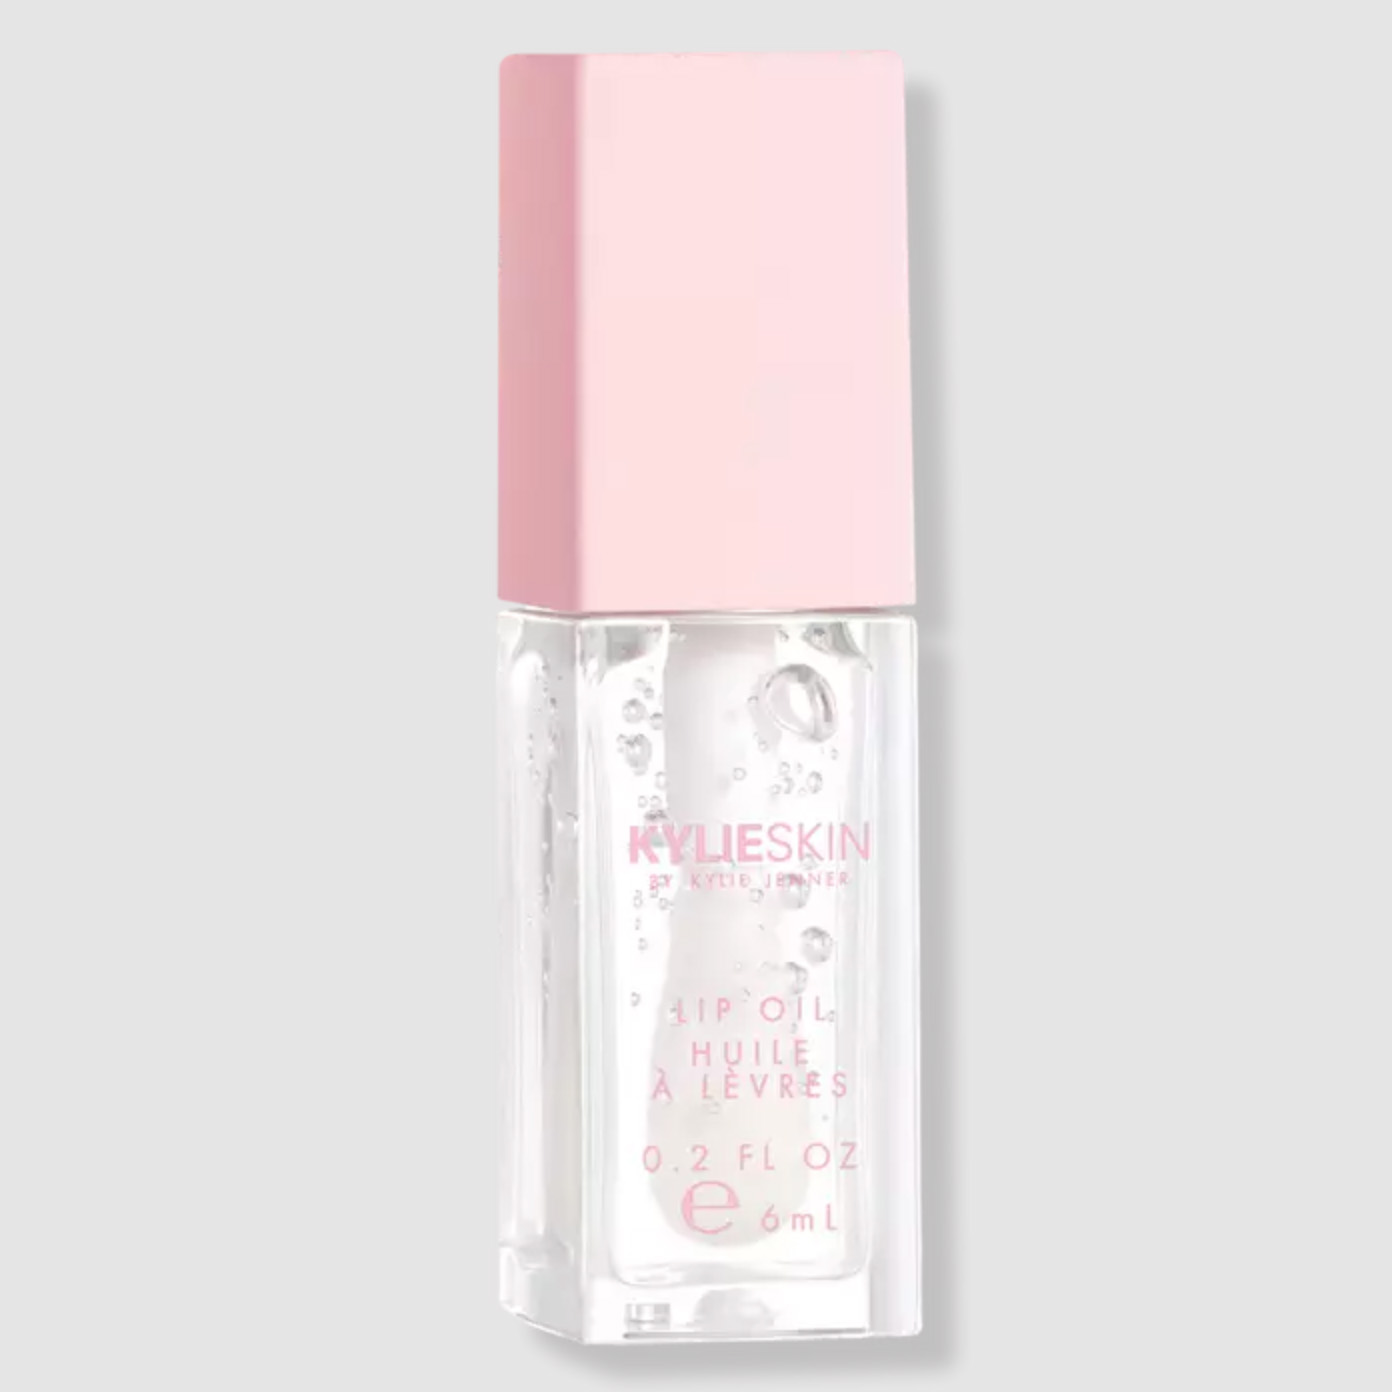 KYLIE SKIN Lip Oil in the shade clear